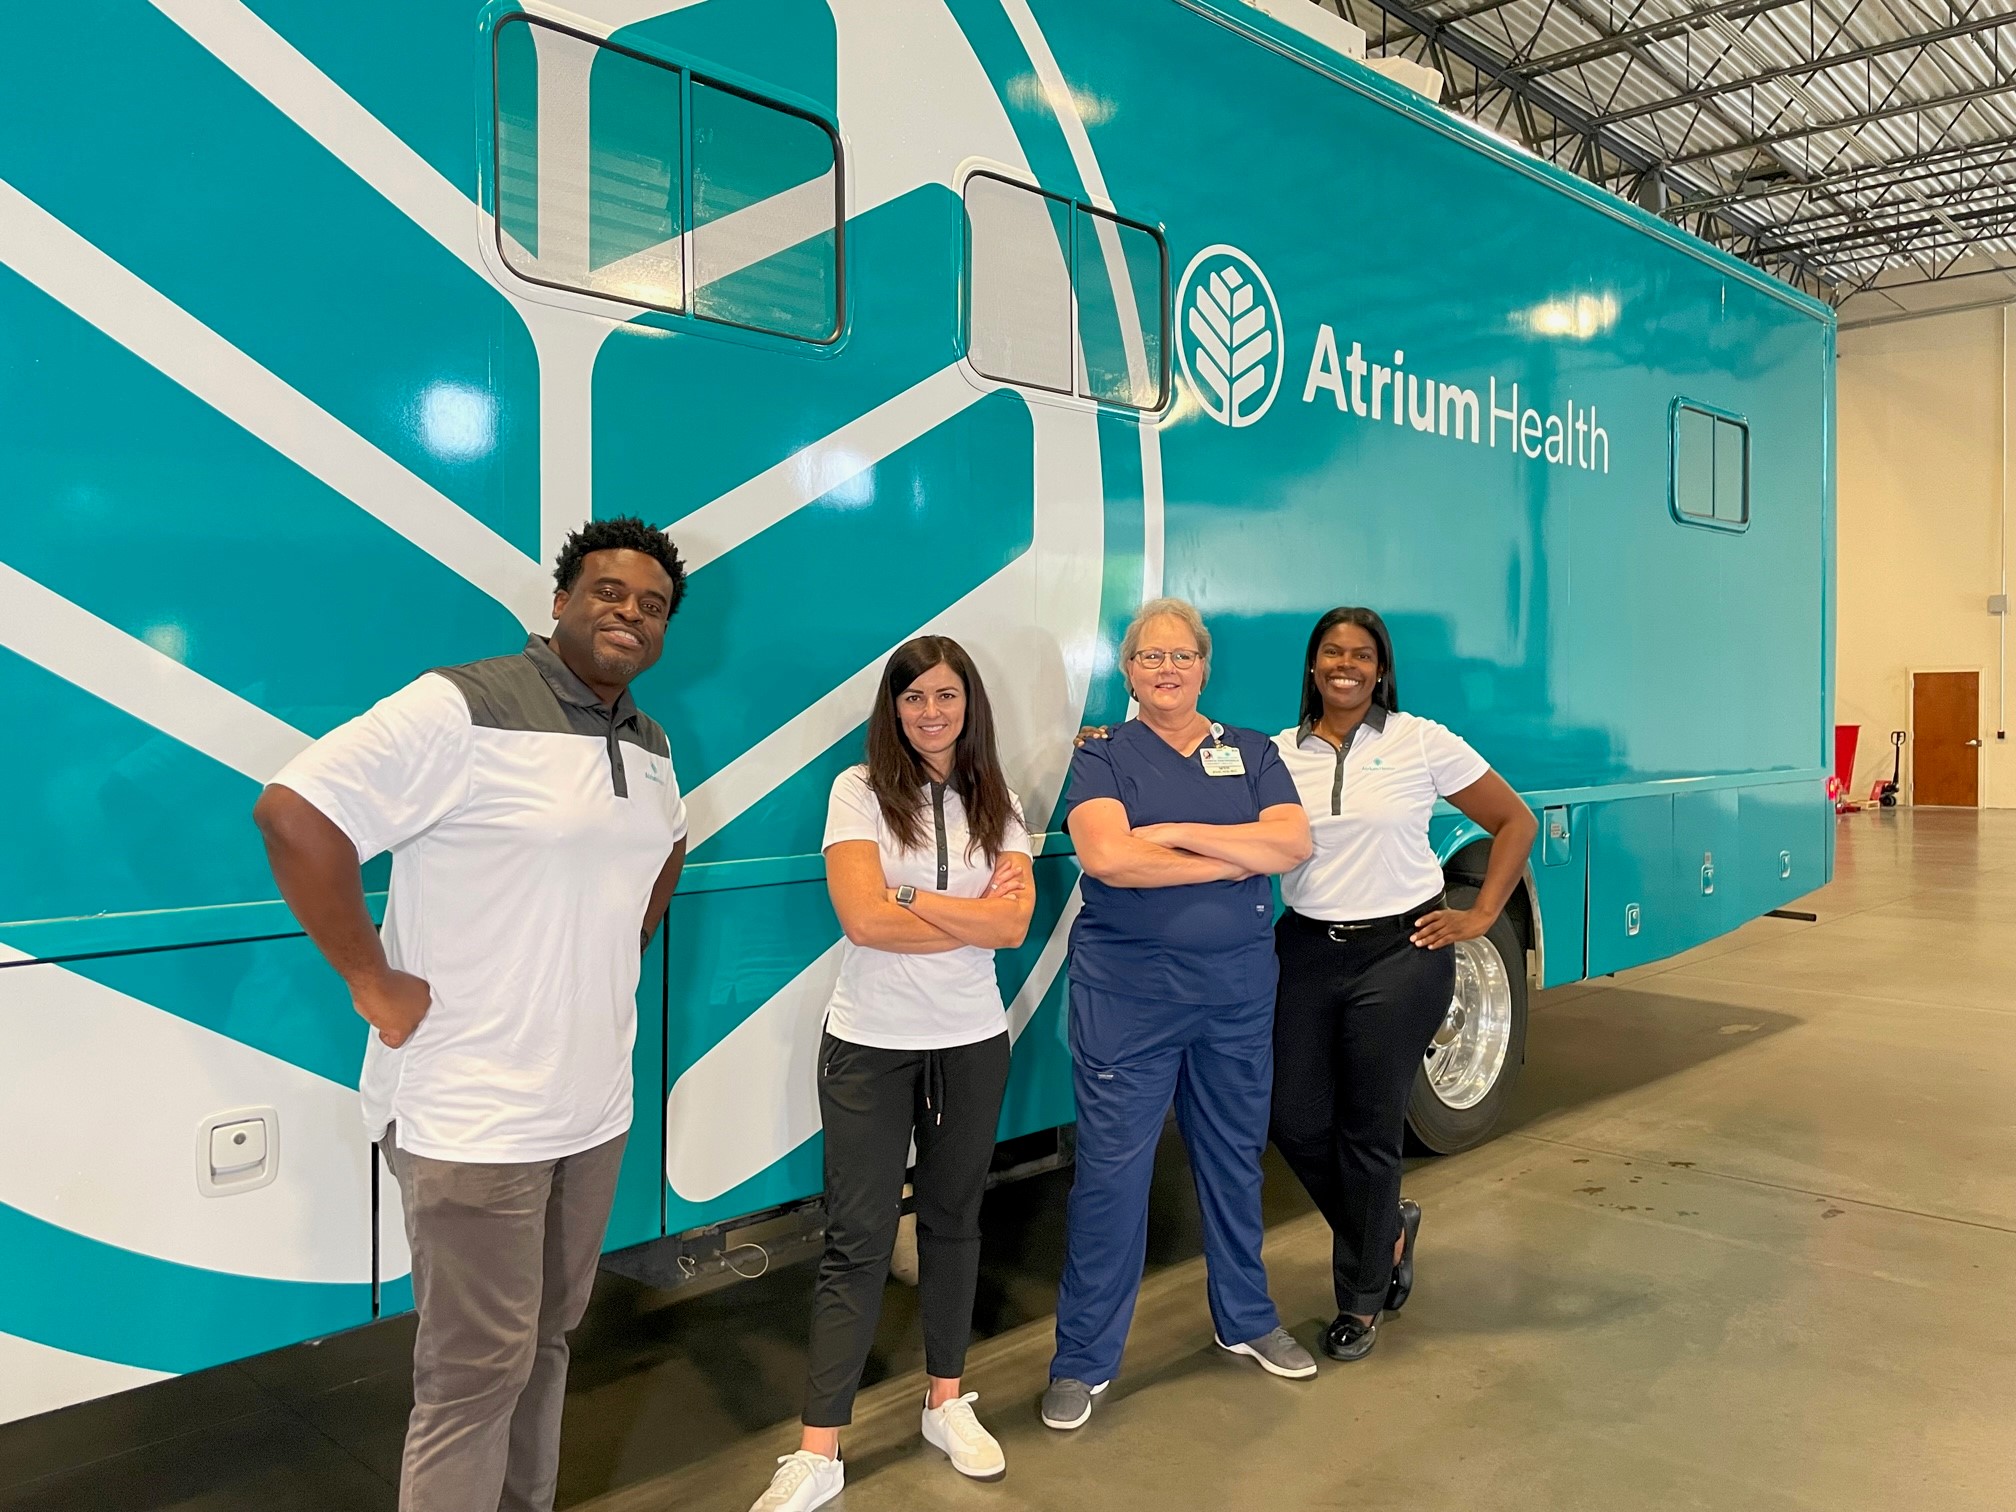 Featured image for “Media Advisory: Atrium Health Launches New Mobile Medicine Unit With Support from The Tepper Foundation”